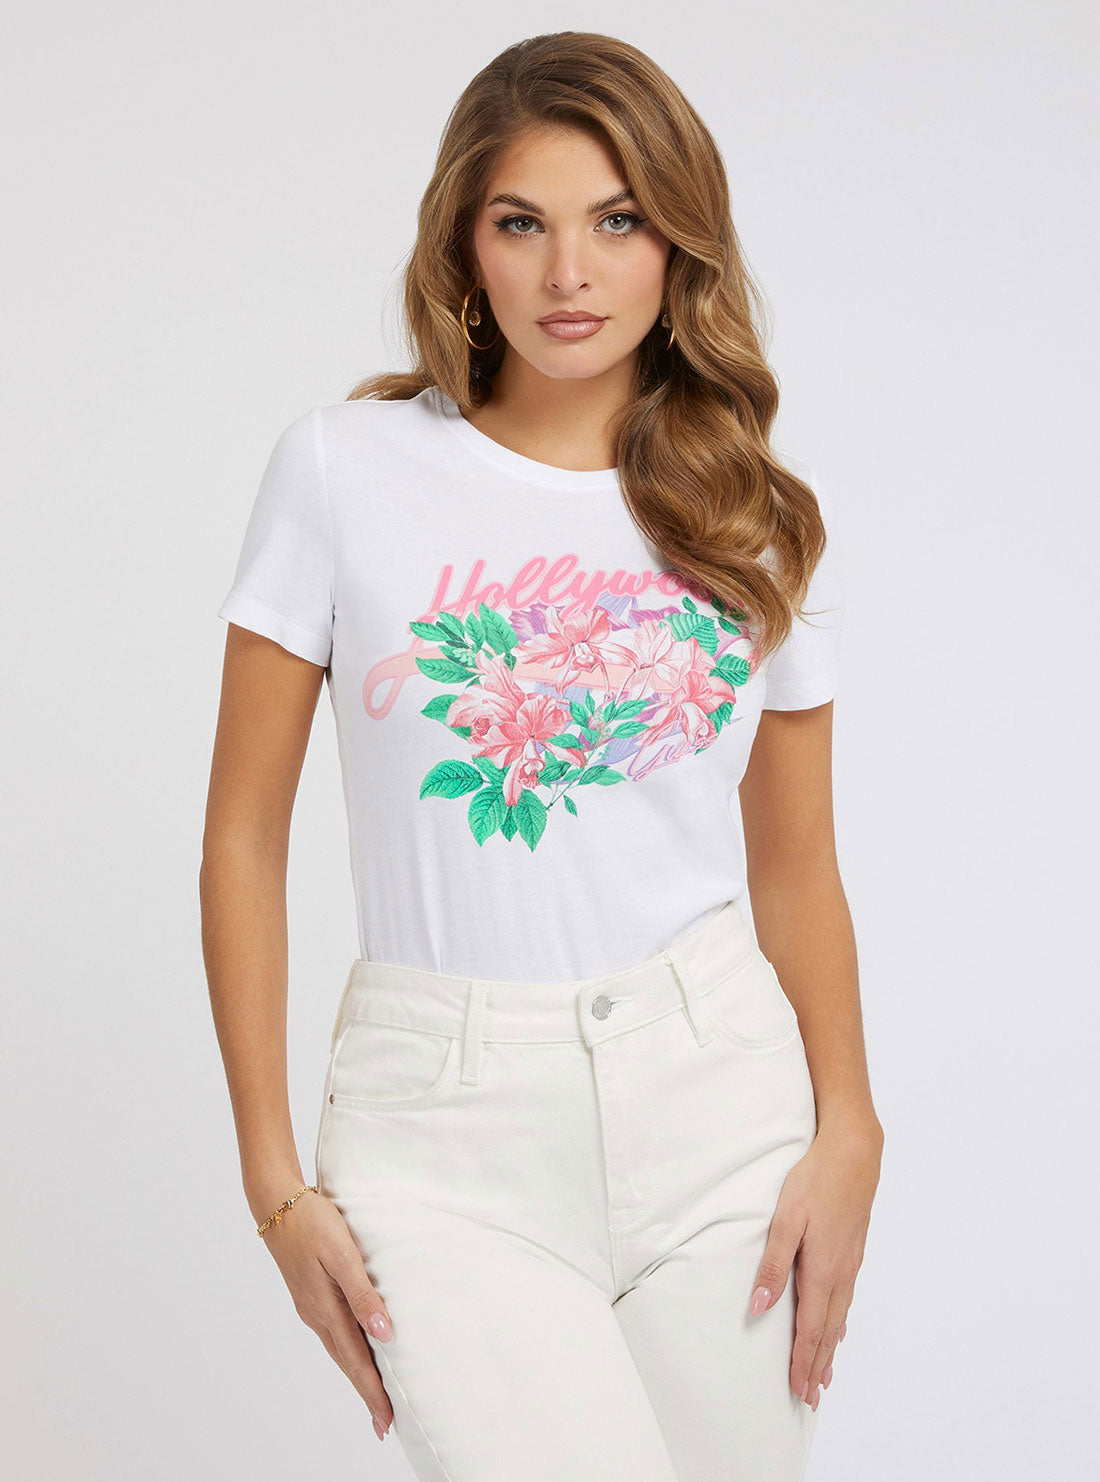 White Floral Print Hollywood T-Shirt | GUESS Women's | Front view